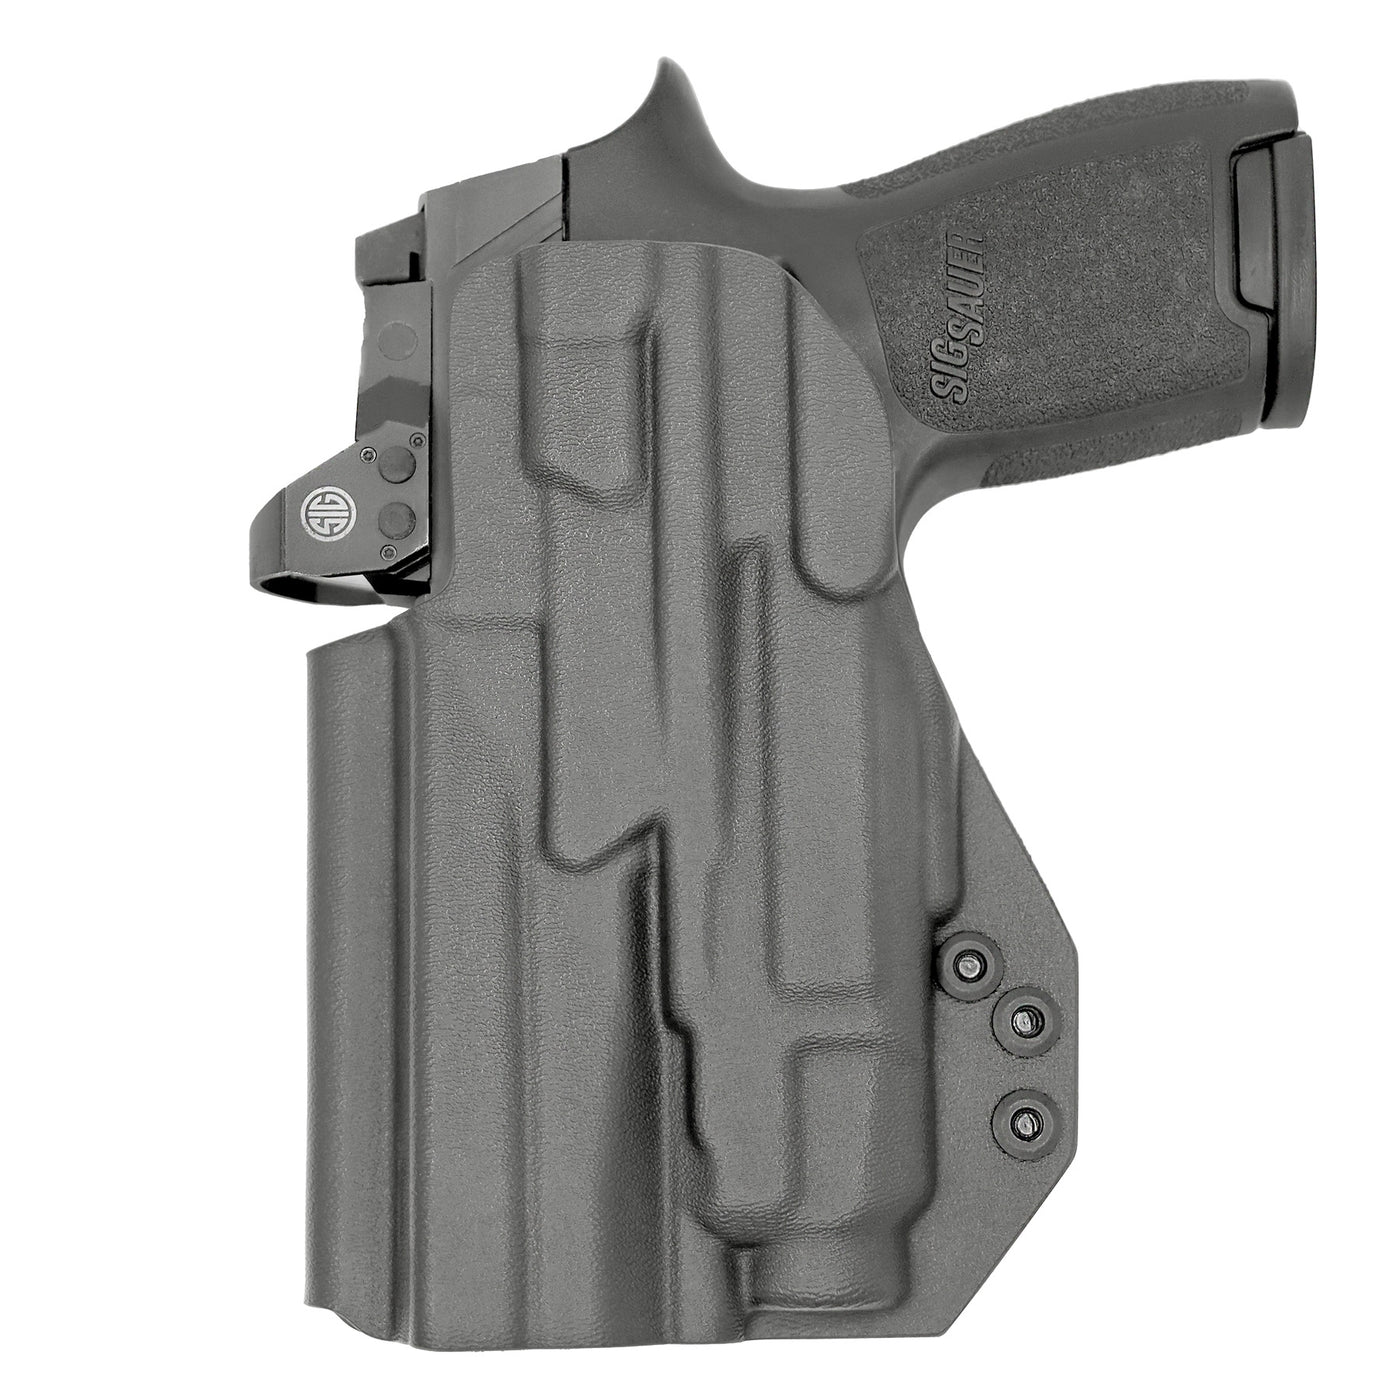 C&G Holsters quickship IWB Tactical Masada Streamlight TLR7/a in holstered position back view